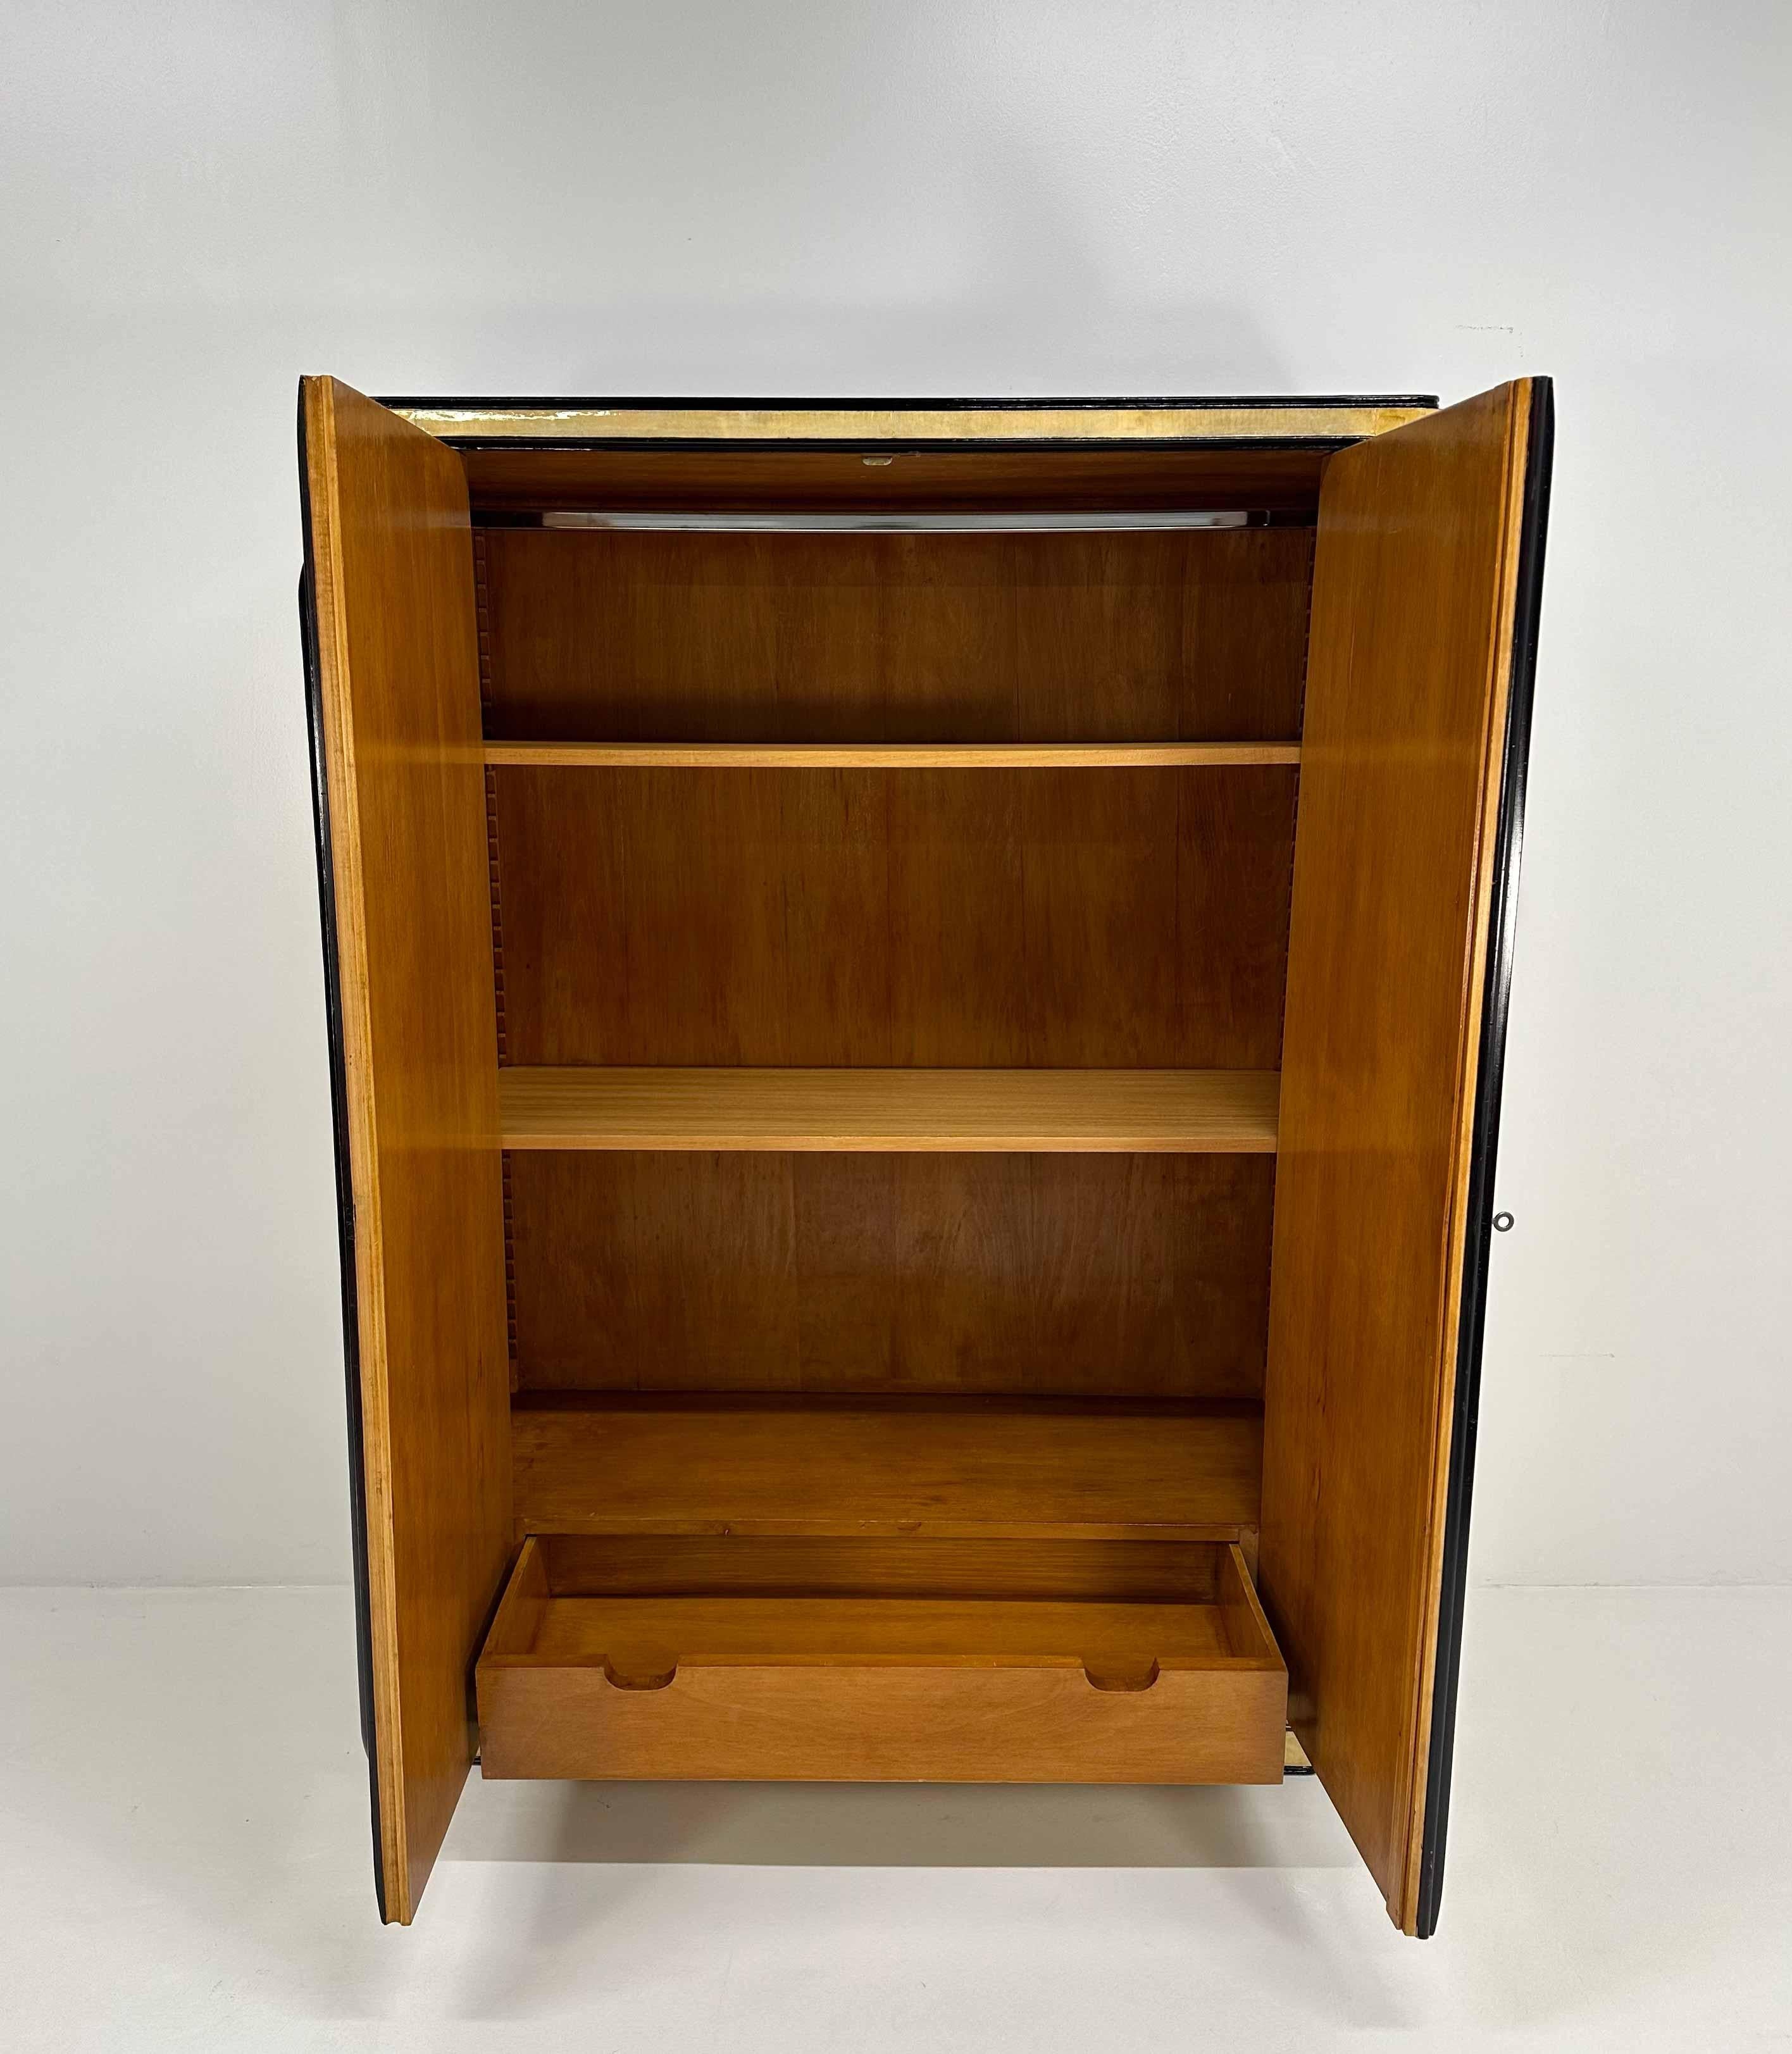 Italian Art Deco Parchment and Walnut Dye Armoire, att. to Ulrich, 1930s For Sale 3